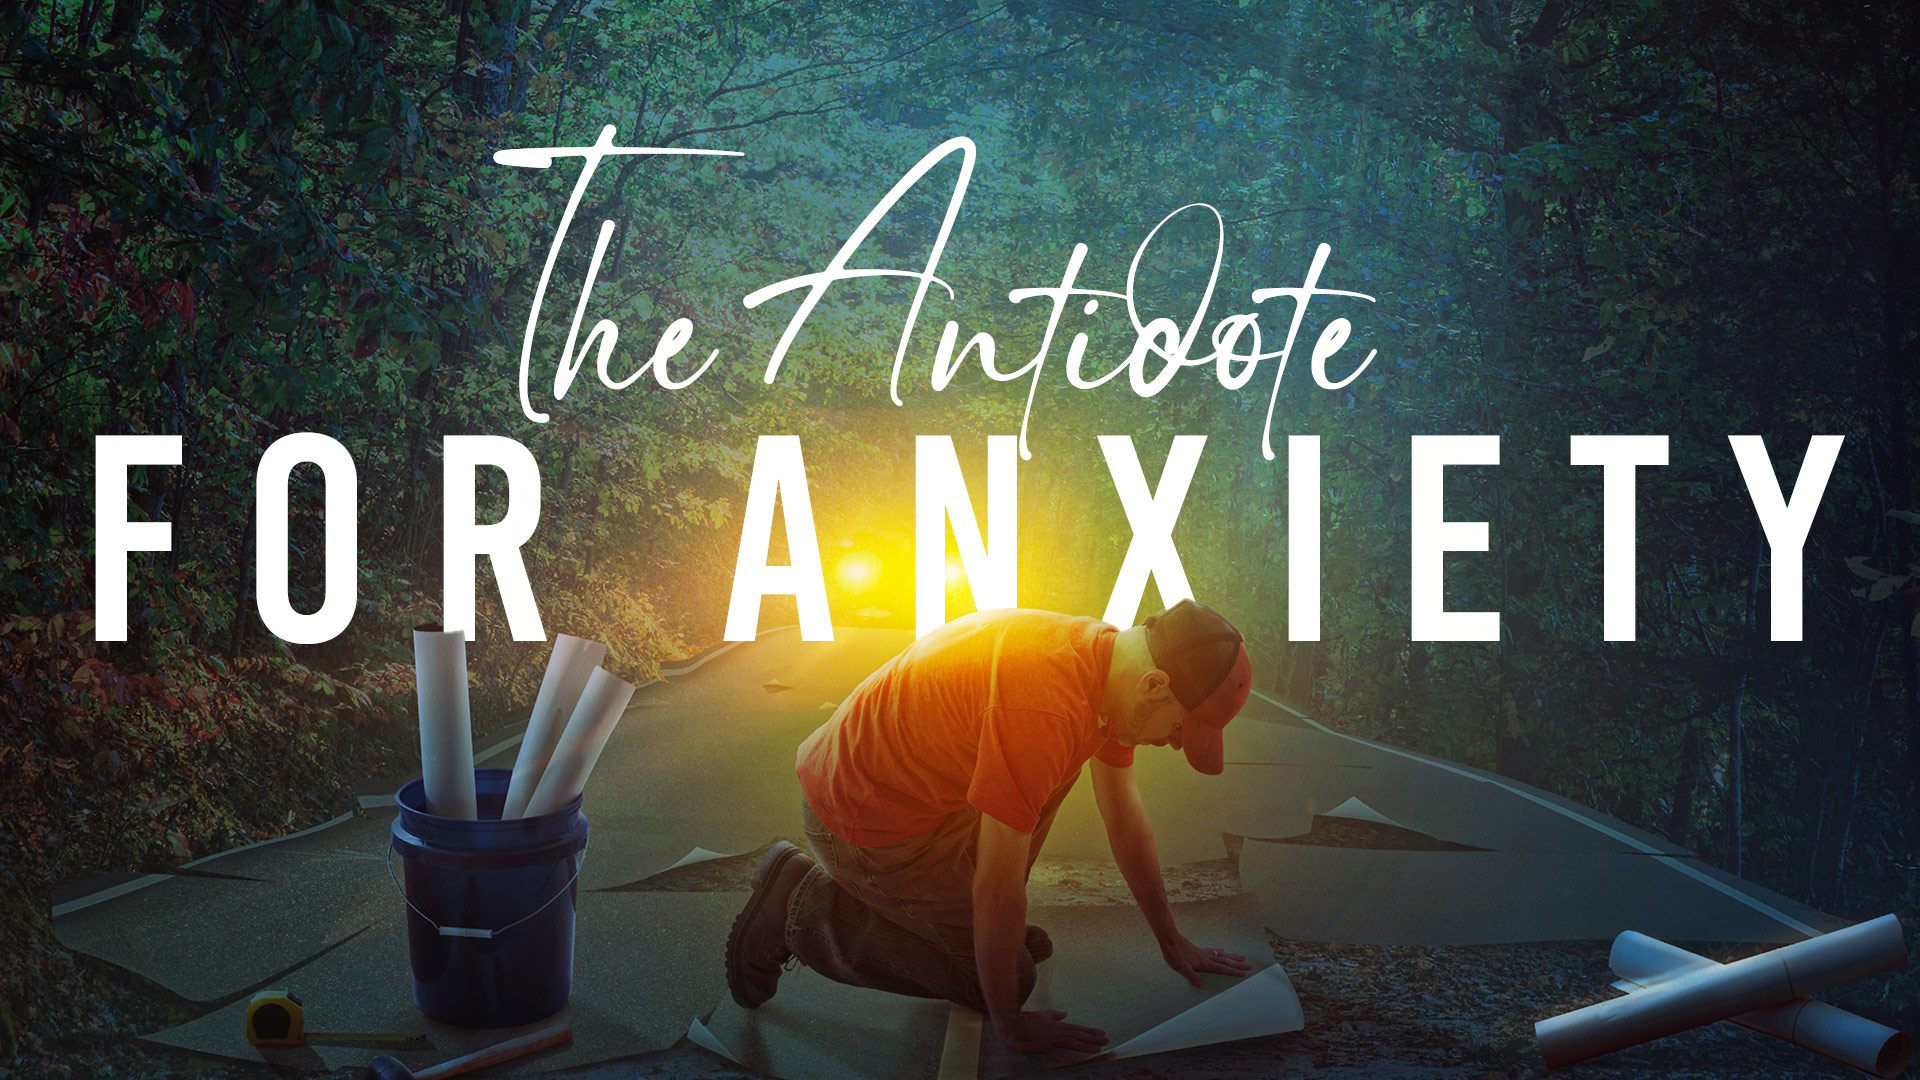 The Antidote for Anxiety